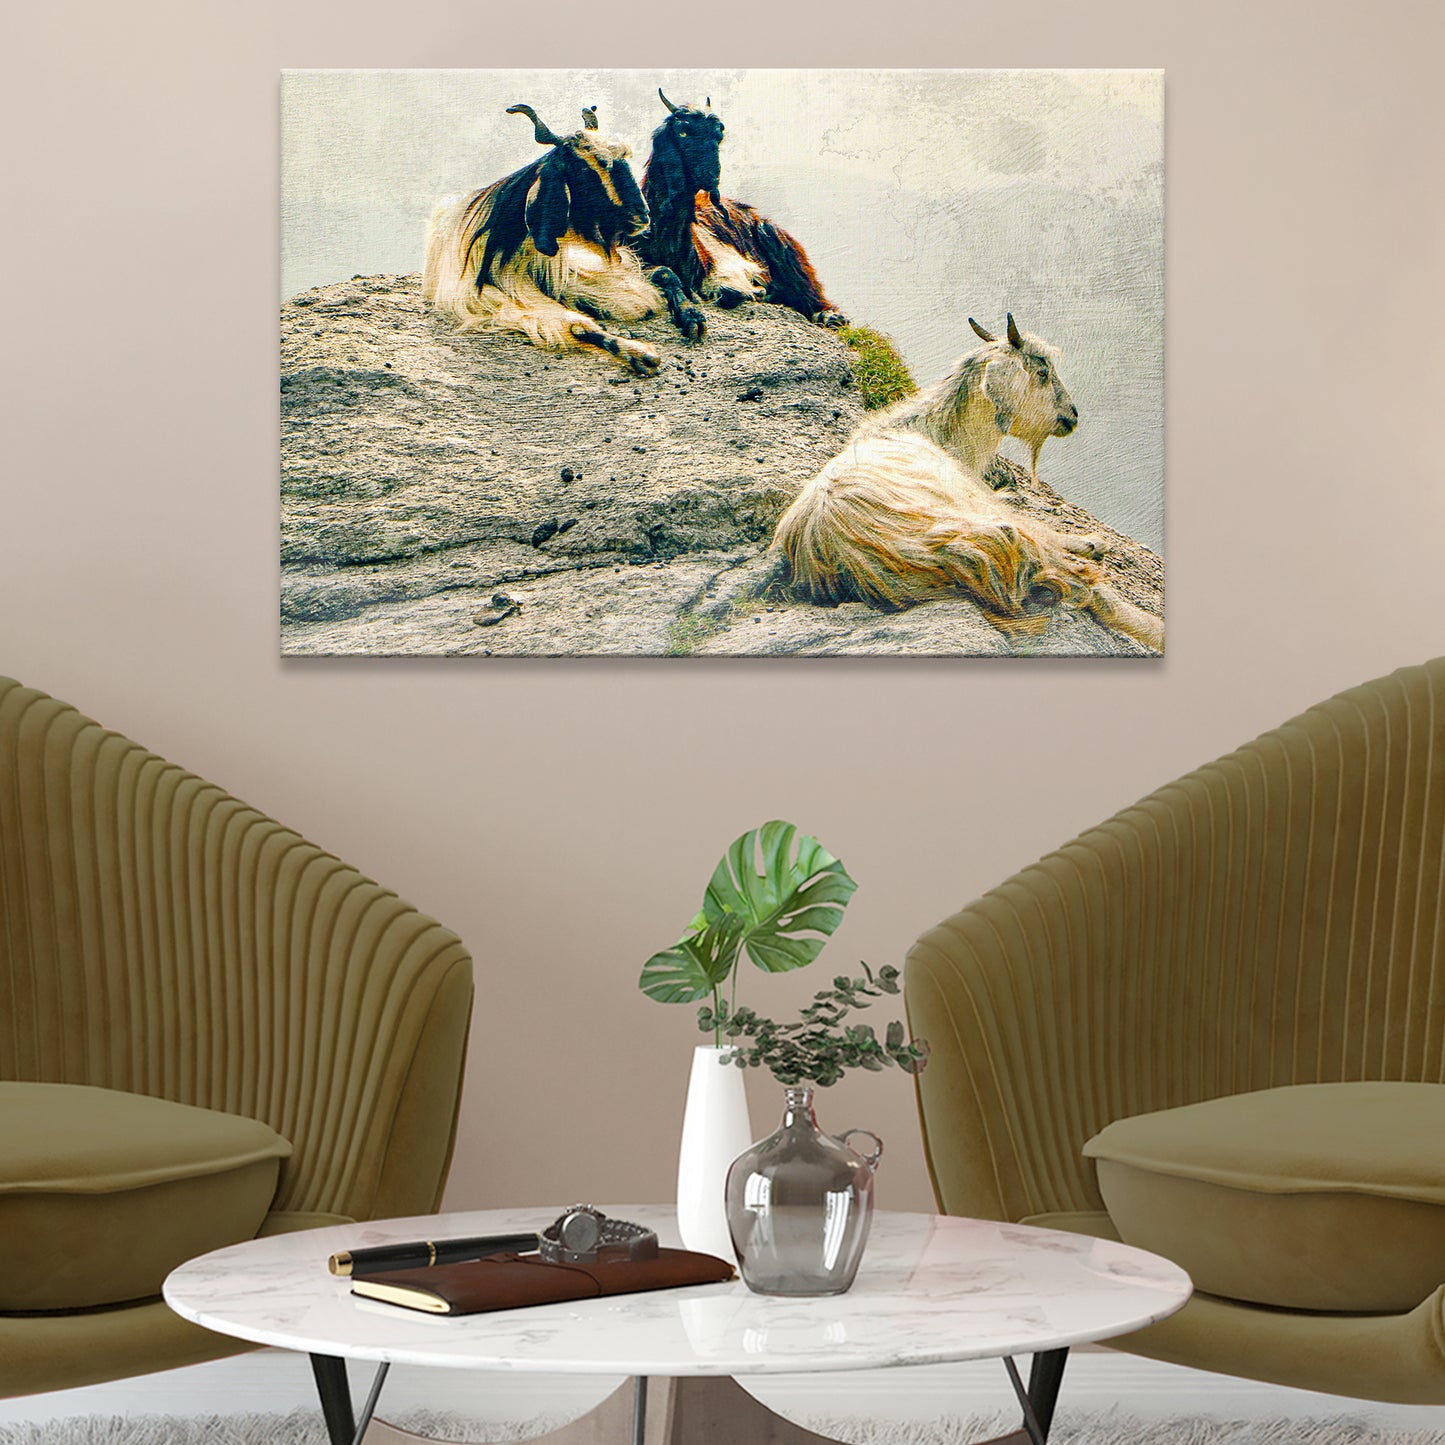 Pashmina Goats On Rocky Mountain Canvas Wall Art - Image by Tailored Canvases